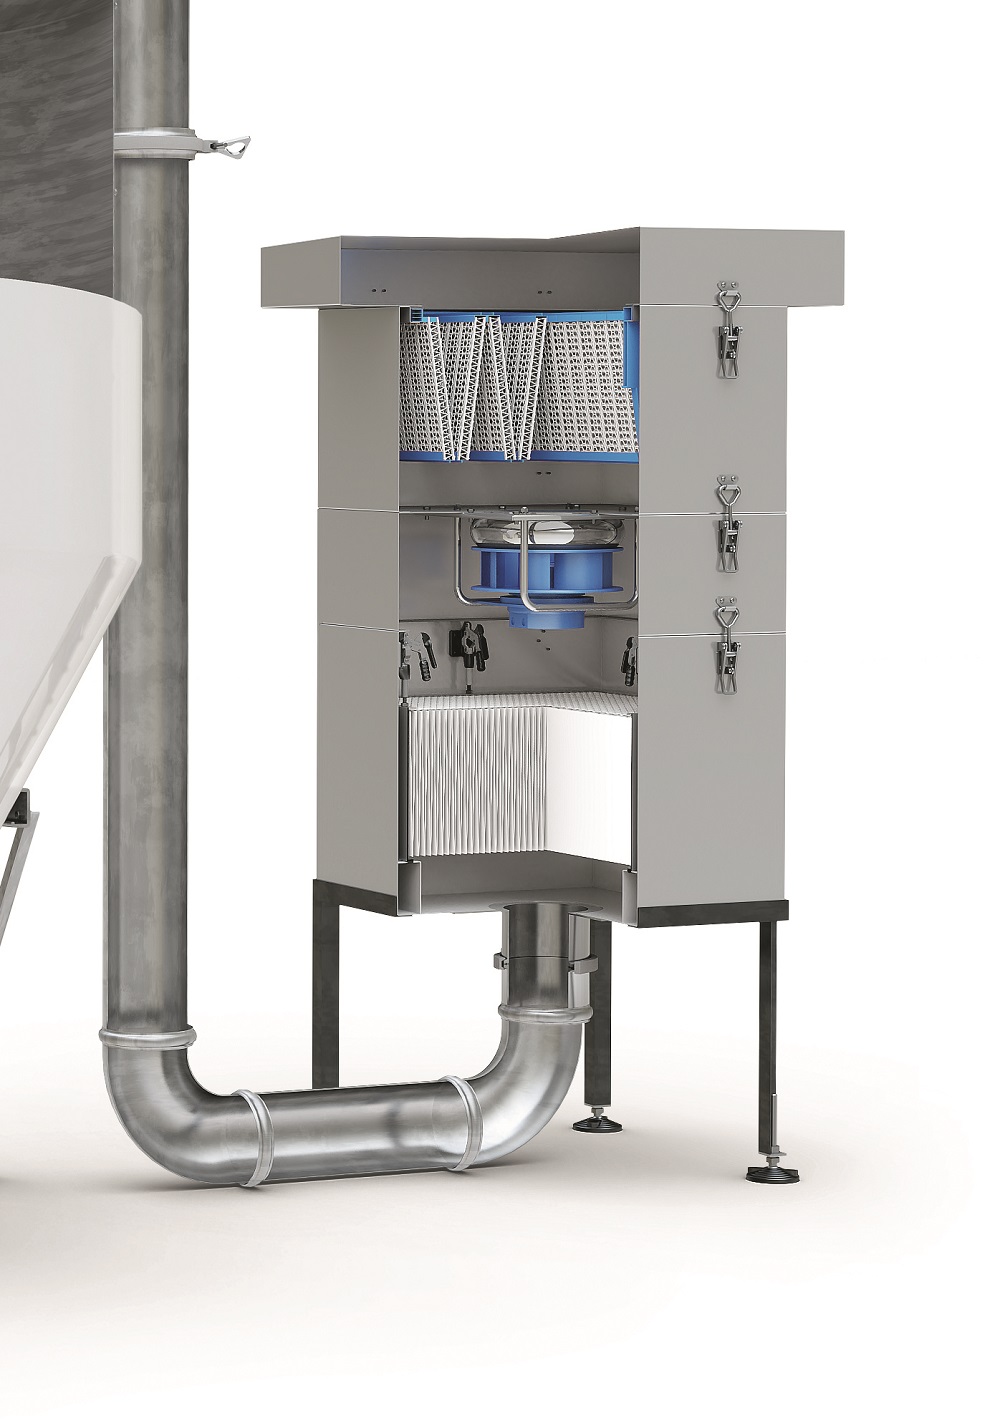 The TPU 500 system creates a germ-free air blanket above the liquid raw, intermediate and end products.